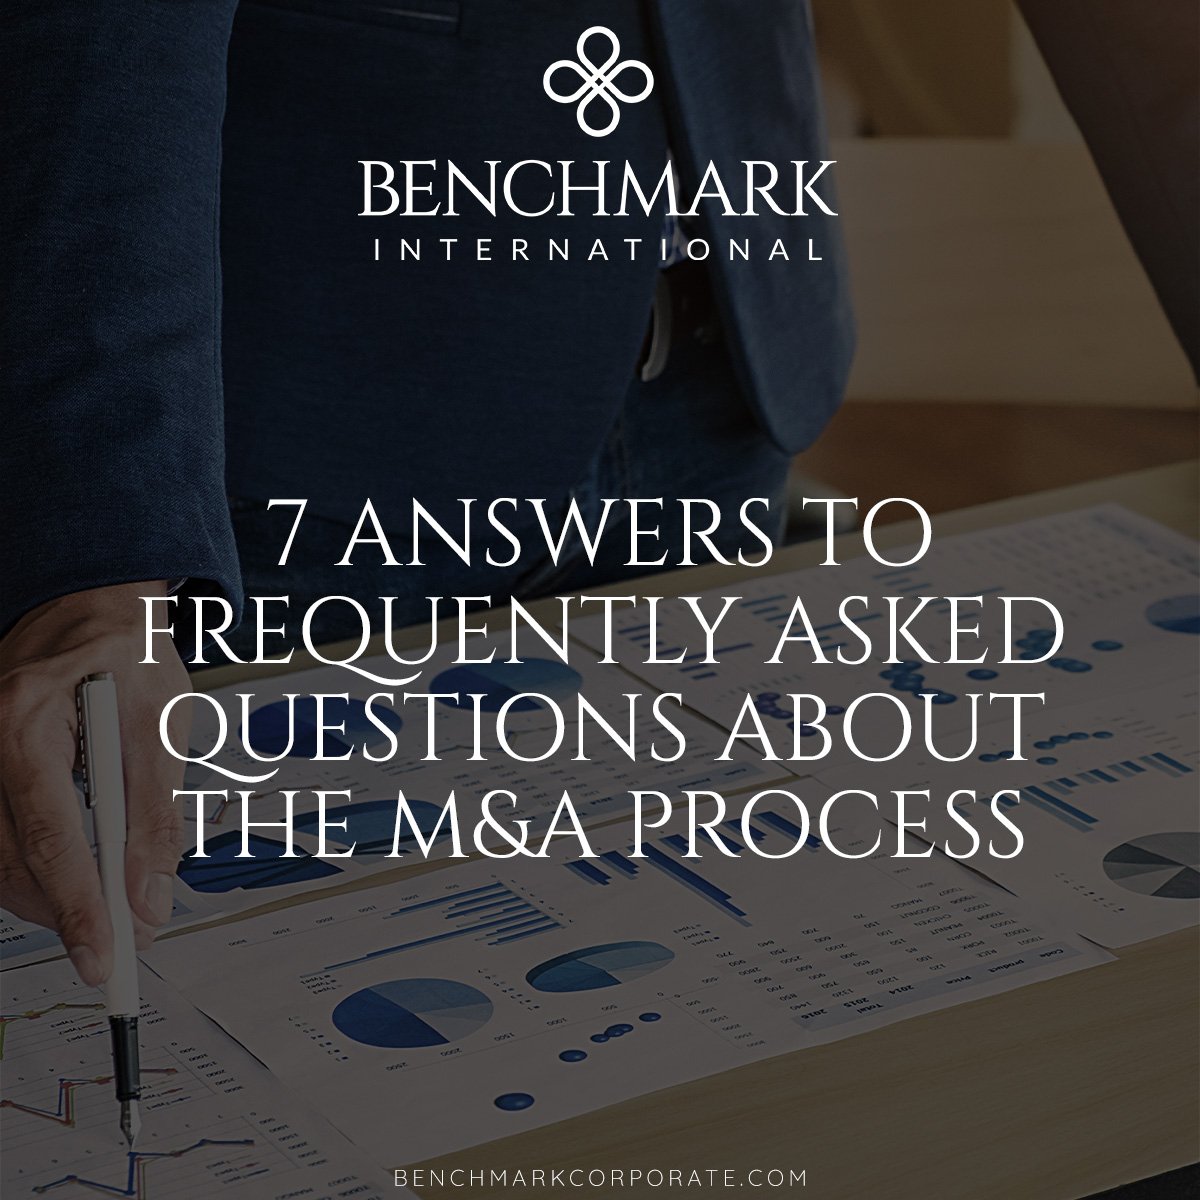 7-Answers_to_frequently_asked_questions-Social